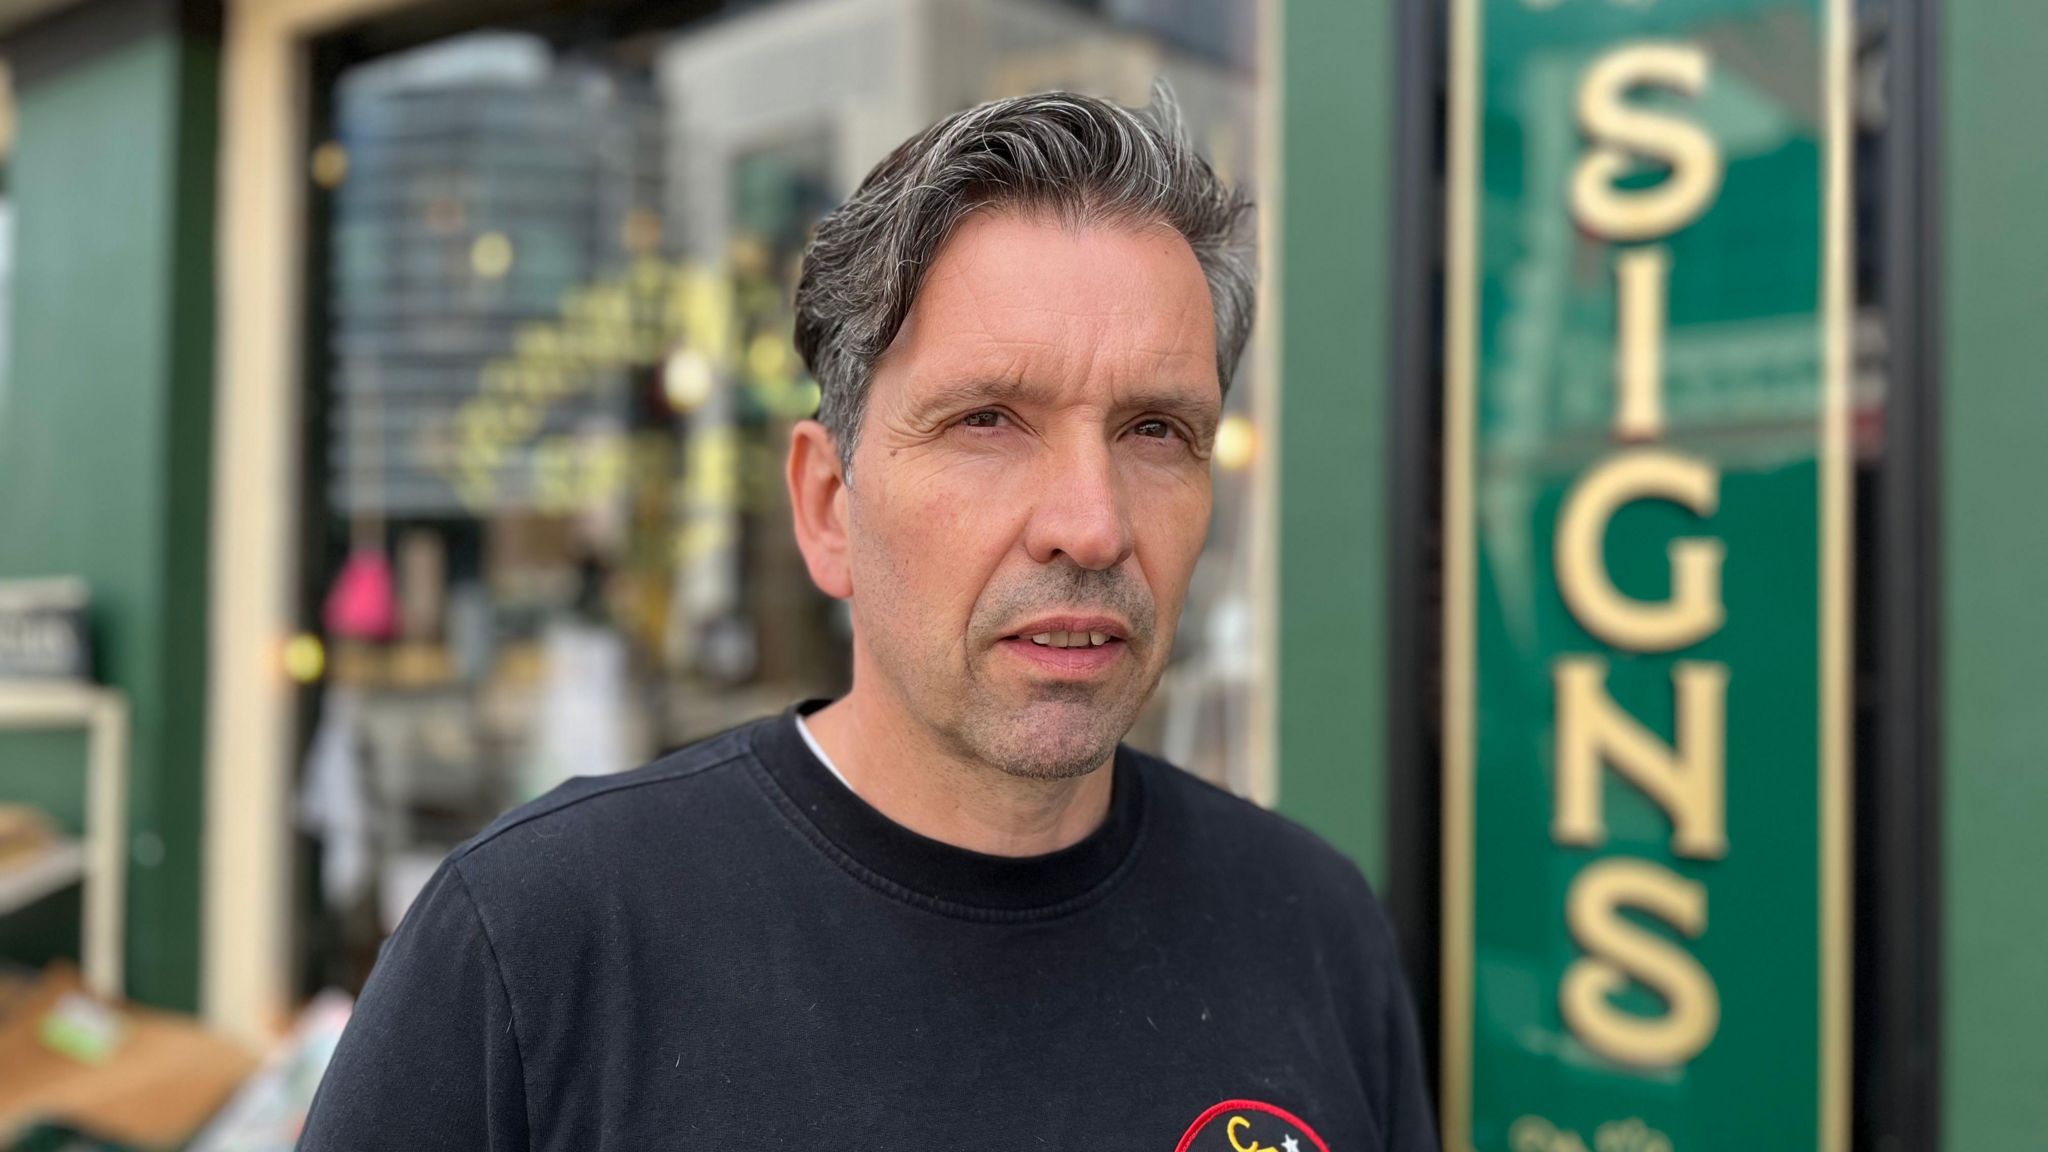 A middle aged white man with black and grey hair and wearing a black tshirt stands in front of the green shop front looking at the camera